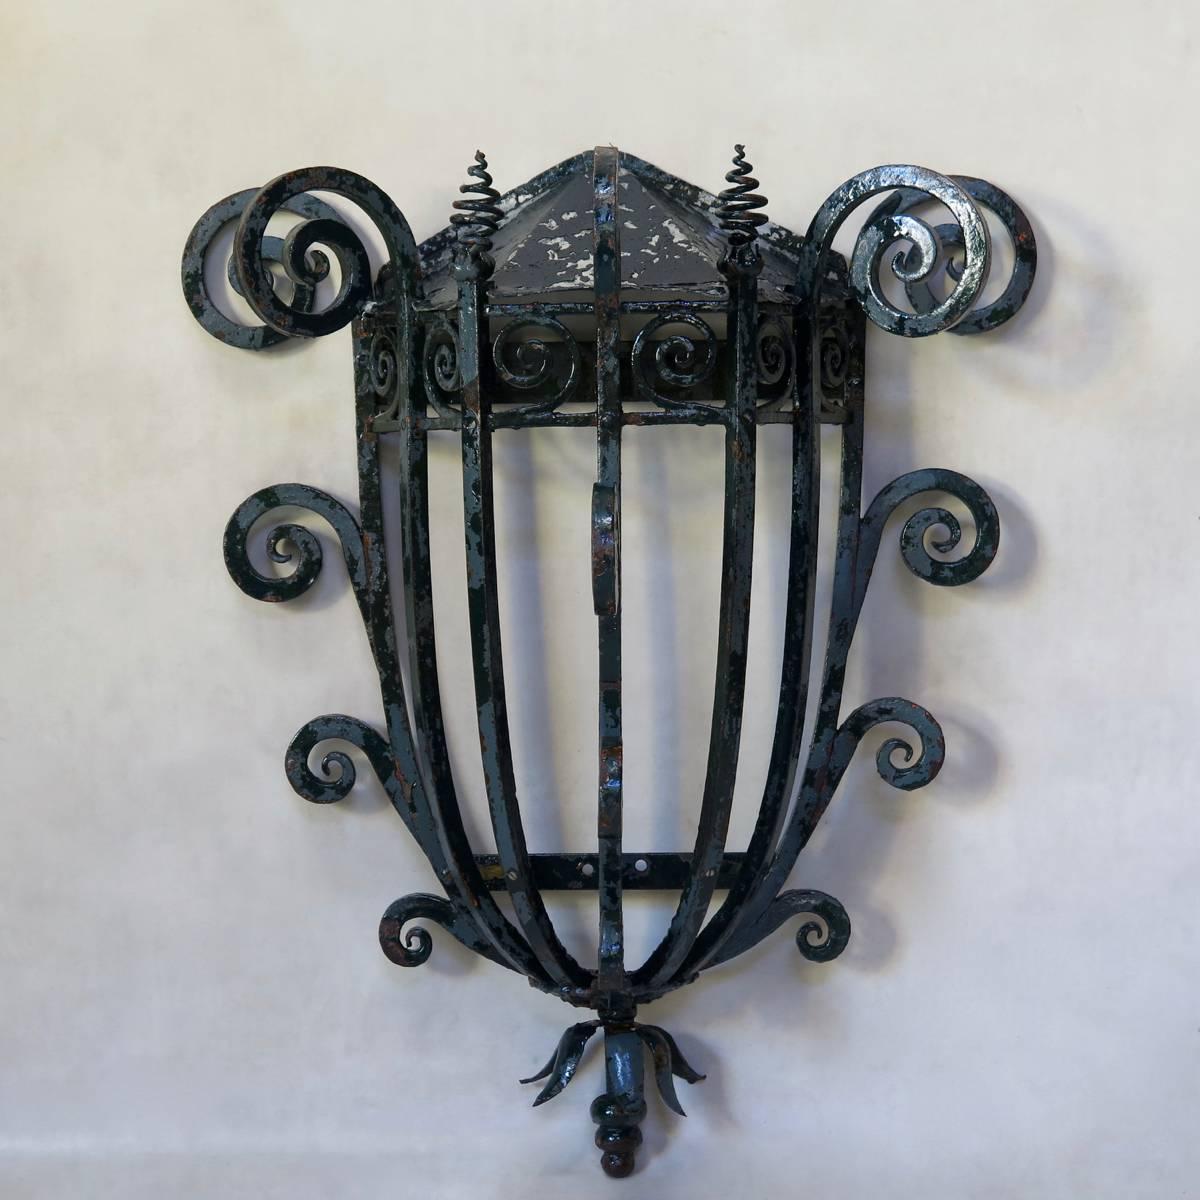 Unusual and elegant pair of heavy iron wall lights, fashioned out of solid wrought iron, with conical metal tops. The curved iron uprights which form the body of the lights end in either large scrolls or corkscrew finials at the top. The side and